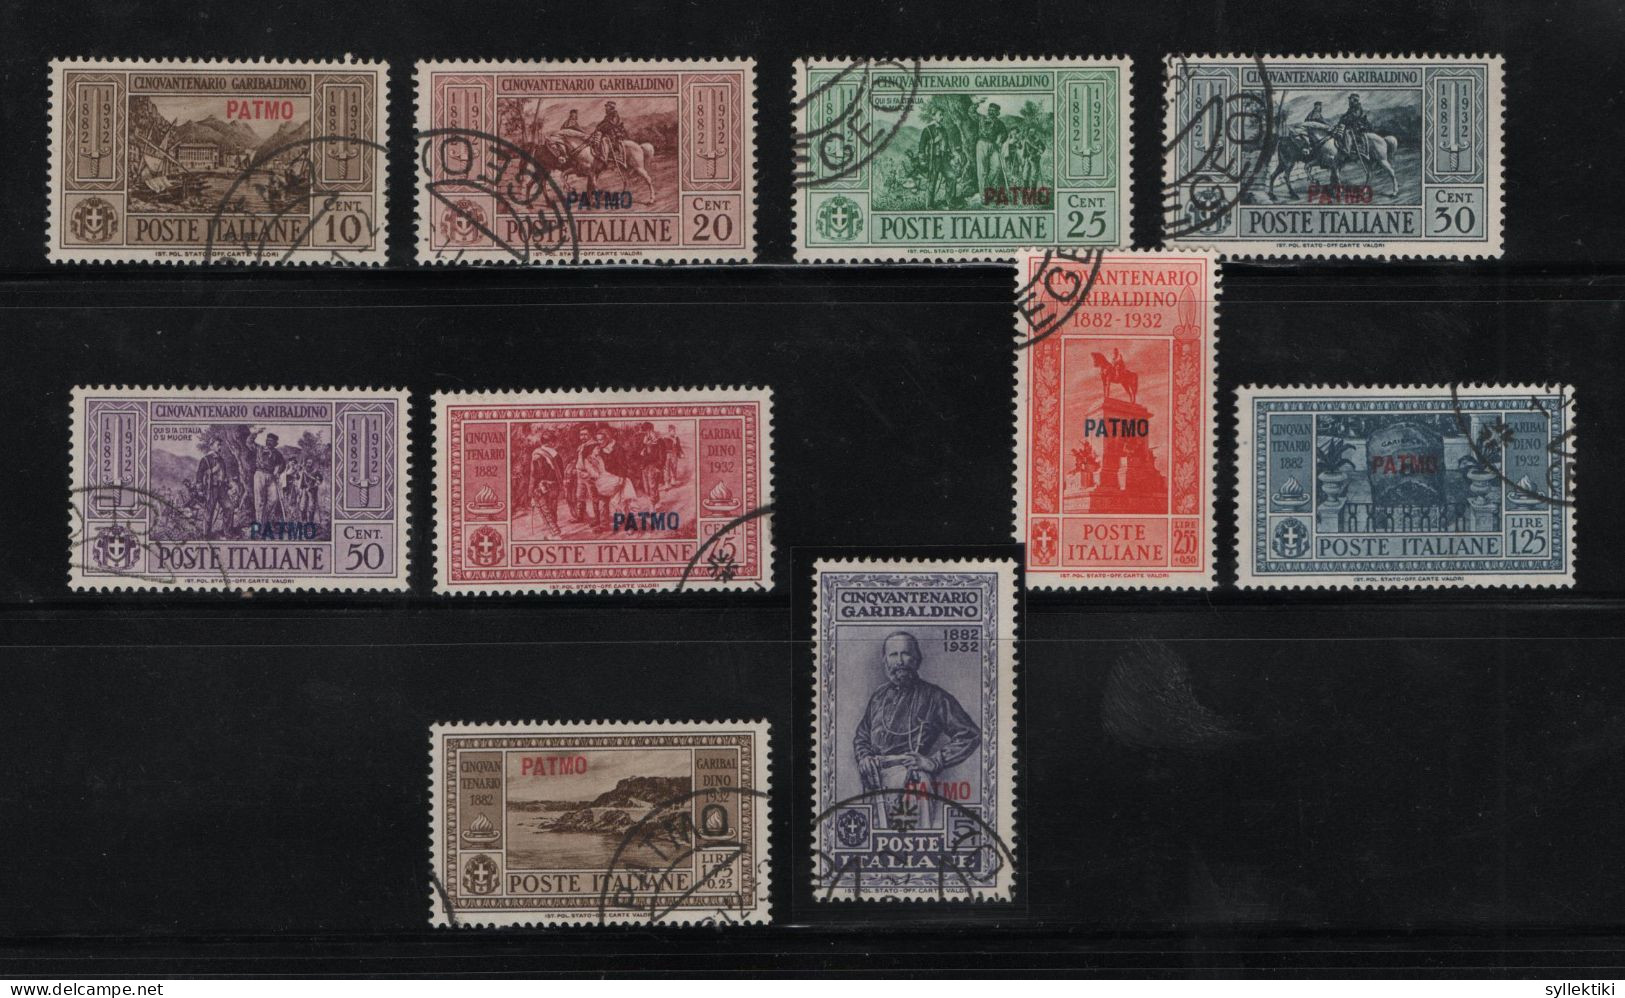 GREECE 1932 DODECANESE GARIBALDI ISSUE PATMO OVERPRINT COMPLETE SET USD STAMPS   HELLAS No 108XI - 117XI AND VALUE EURO - Dodekanisos